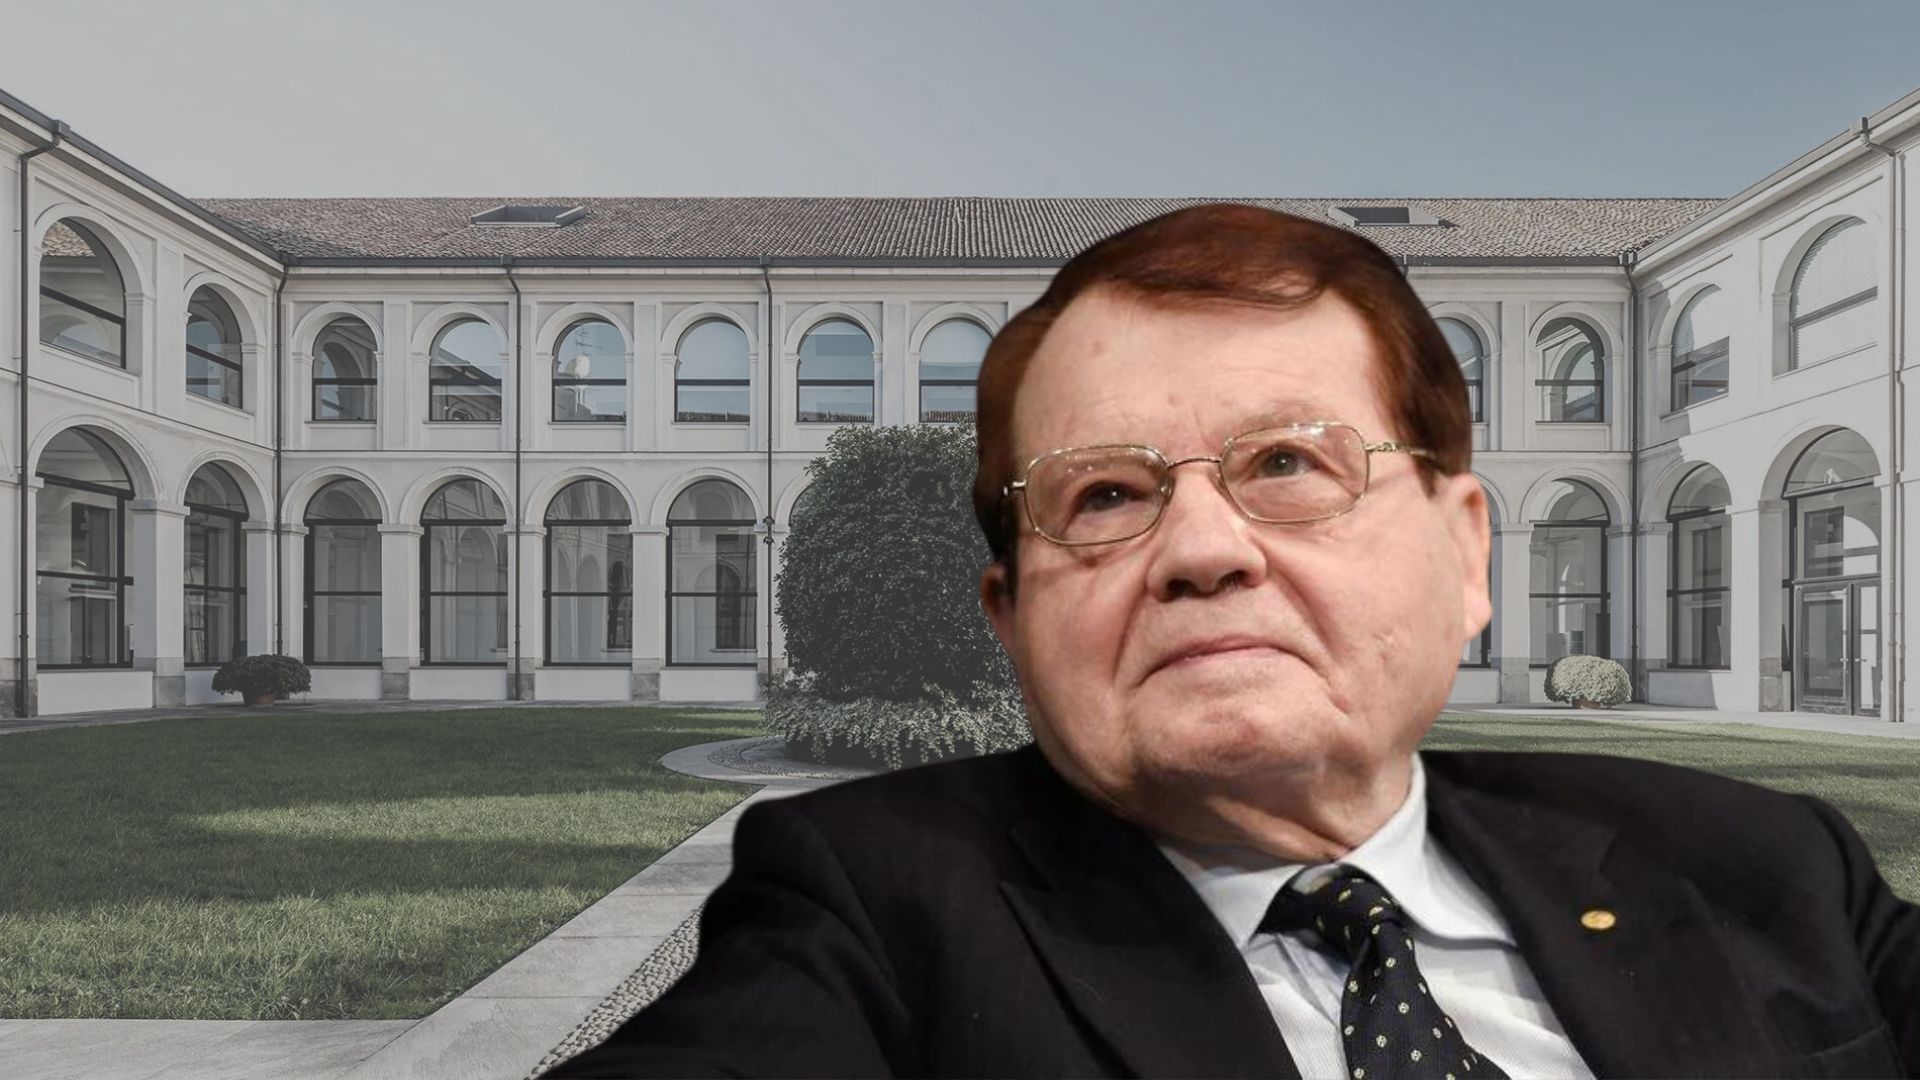 Italy: the first Luc Montagnier Prize awarded to five personalities for “their independence” during the Covid-19 crisis